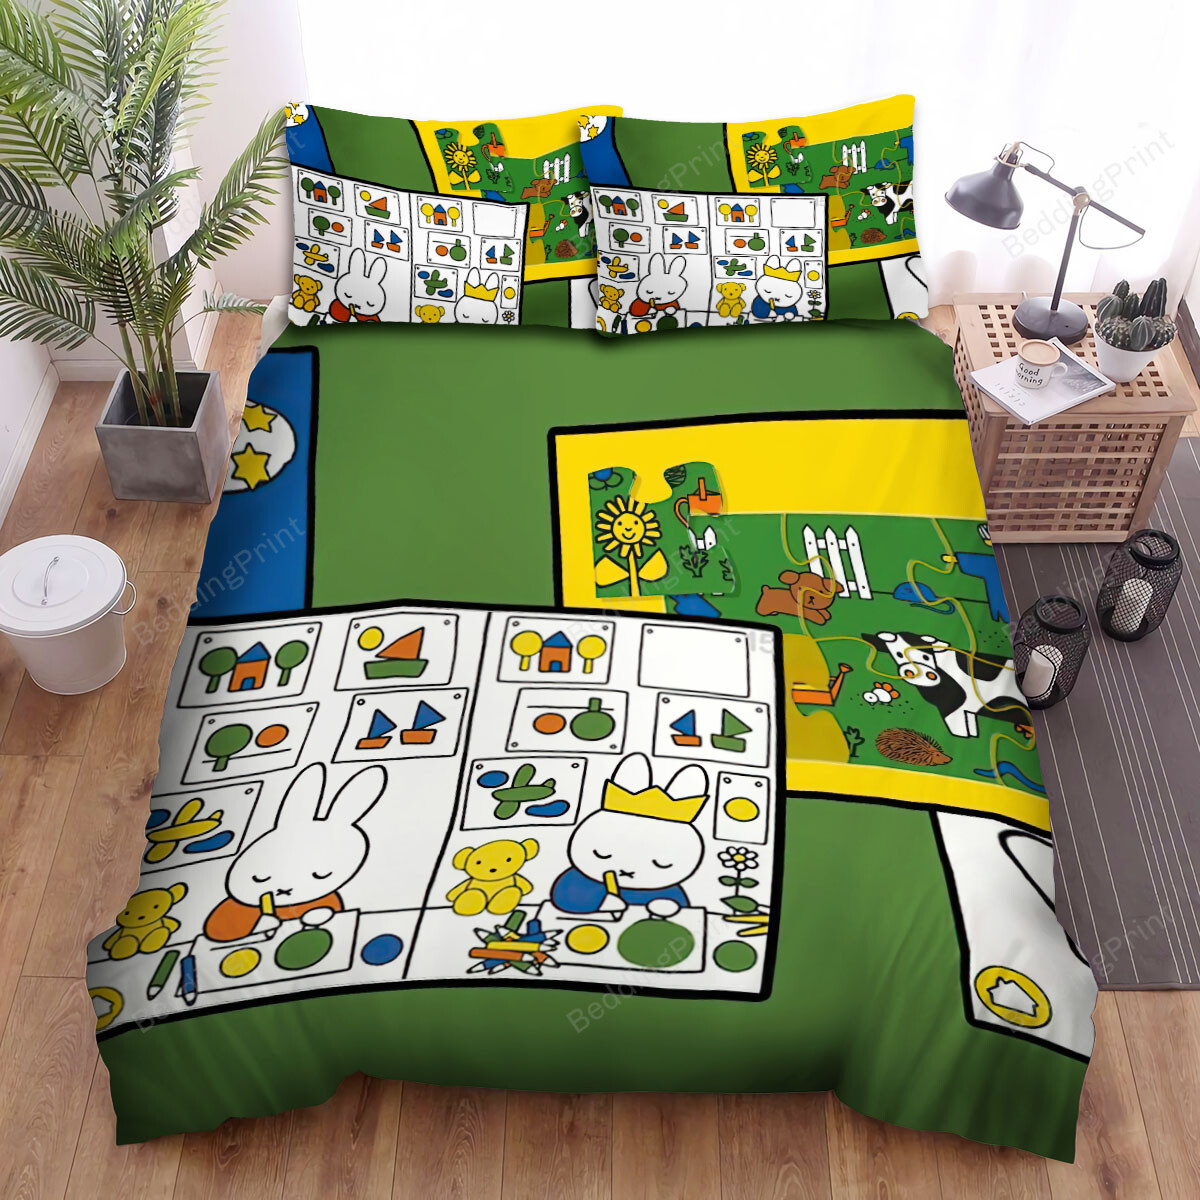 Miffy's Adventures Big And Small Miffy Studying Bed Sheets Spread Duvet Cover Bedding Sets